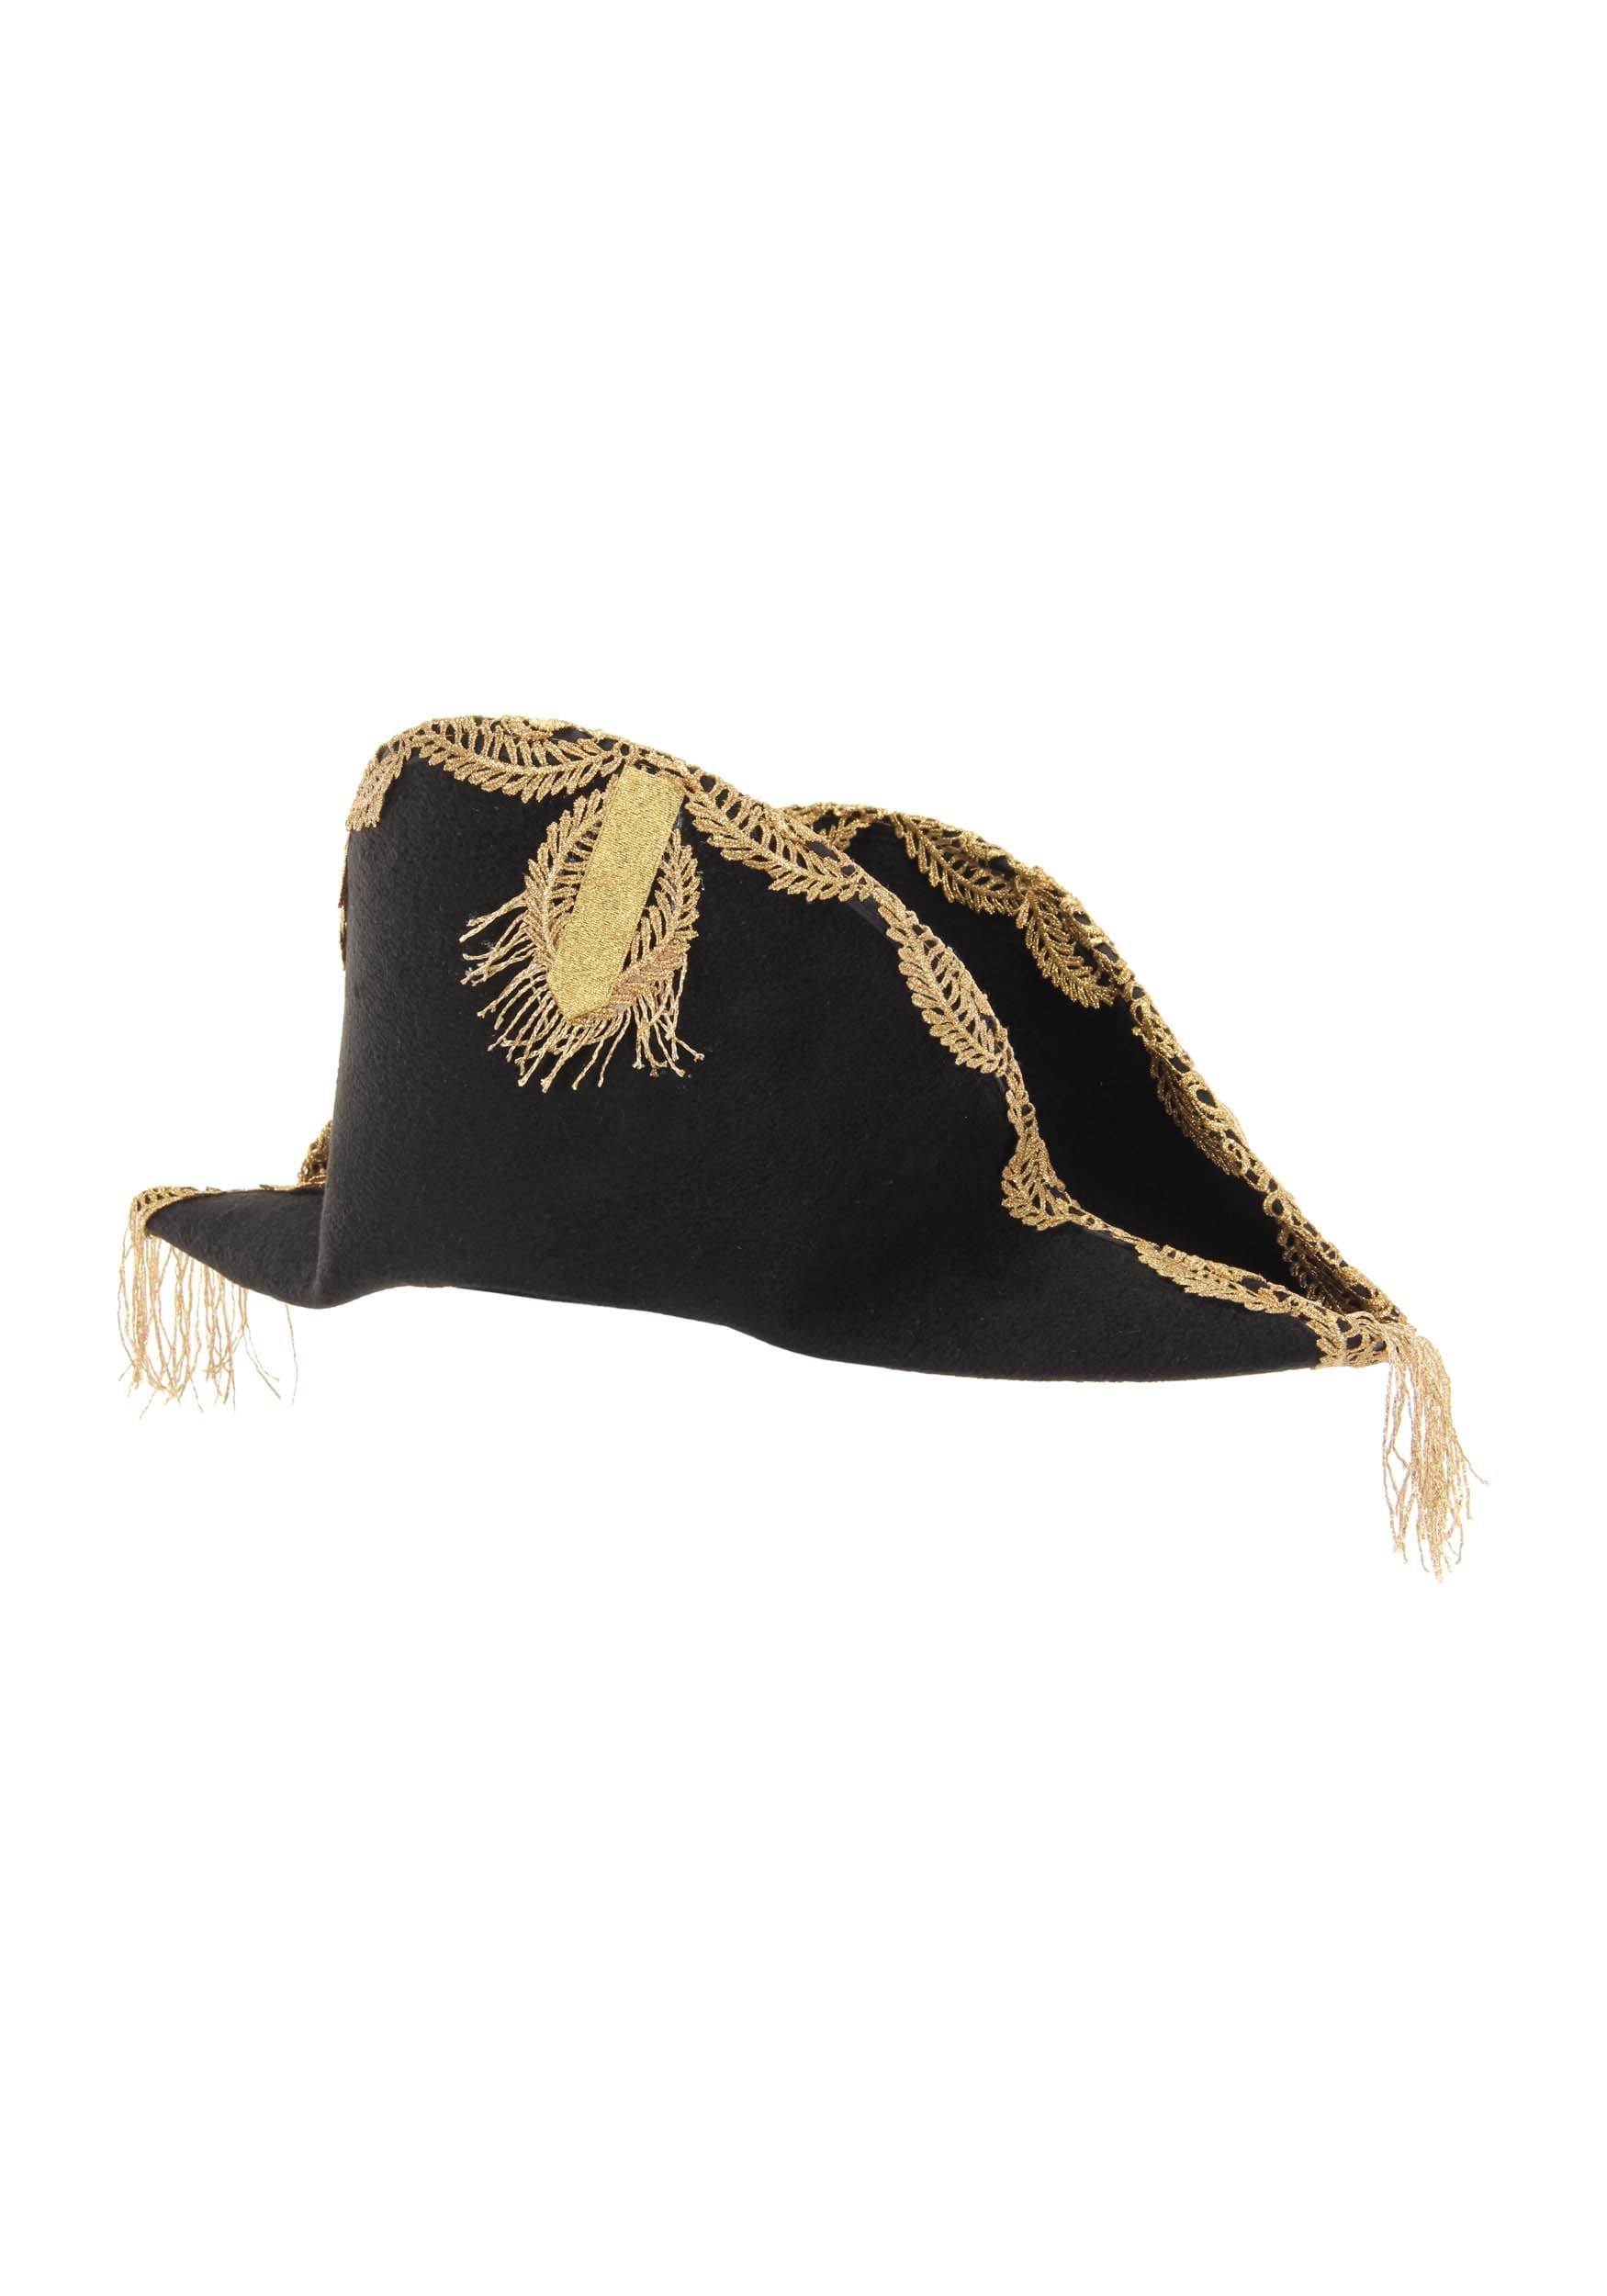 Disney Barbossa Pirate Costume Hat For Adults , Pirate Hats